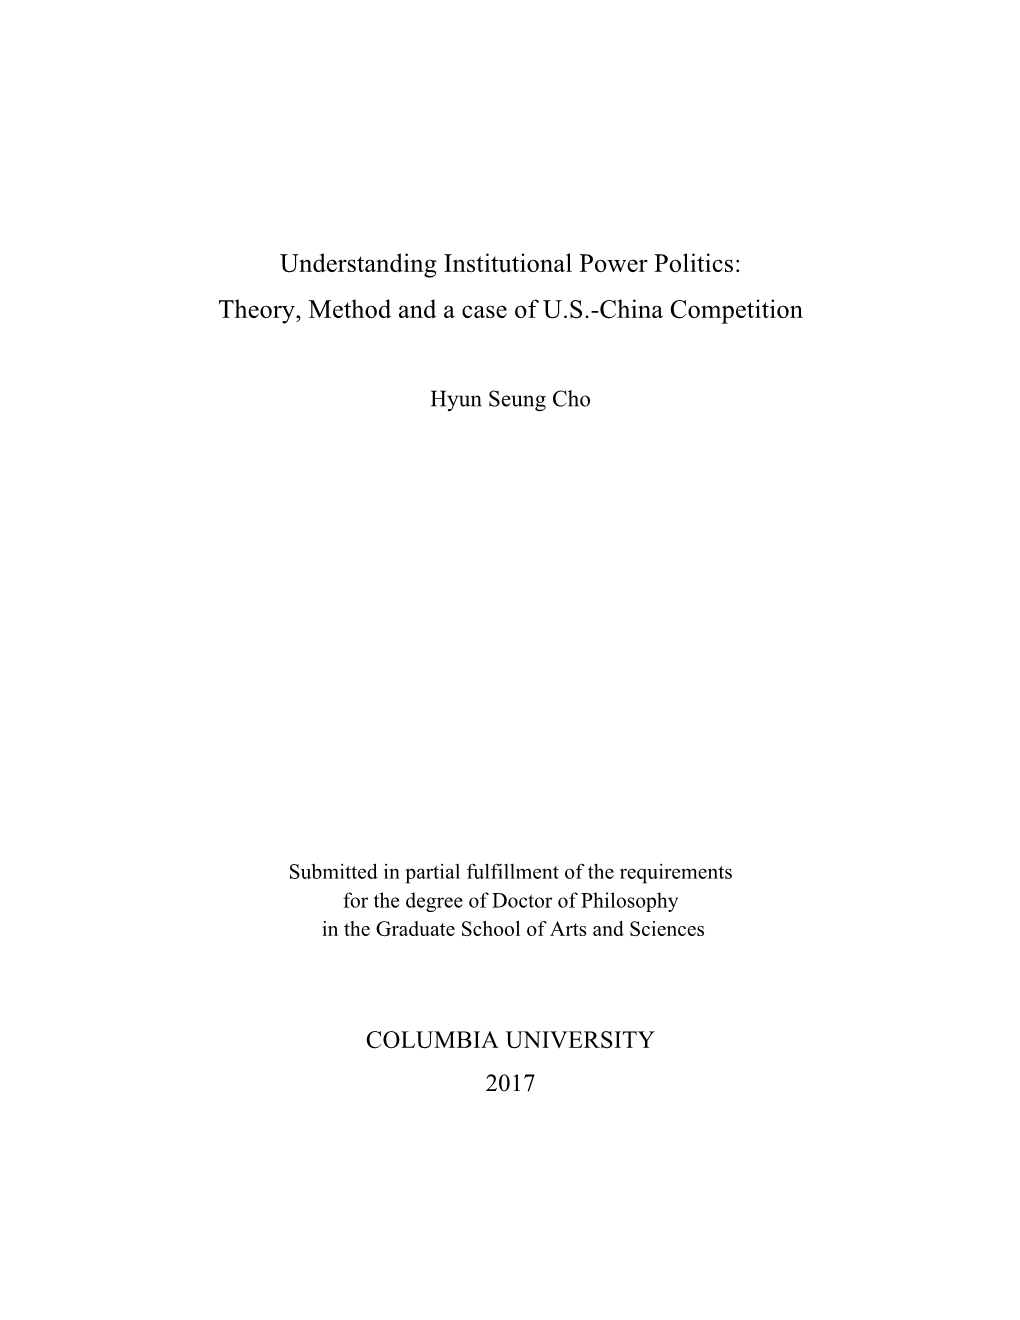 Understanding Institutional Power Politics: Theory, Method and a Case of U.S.-China Competition